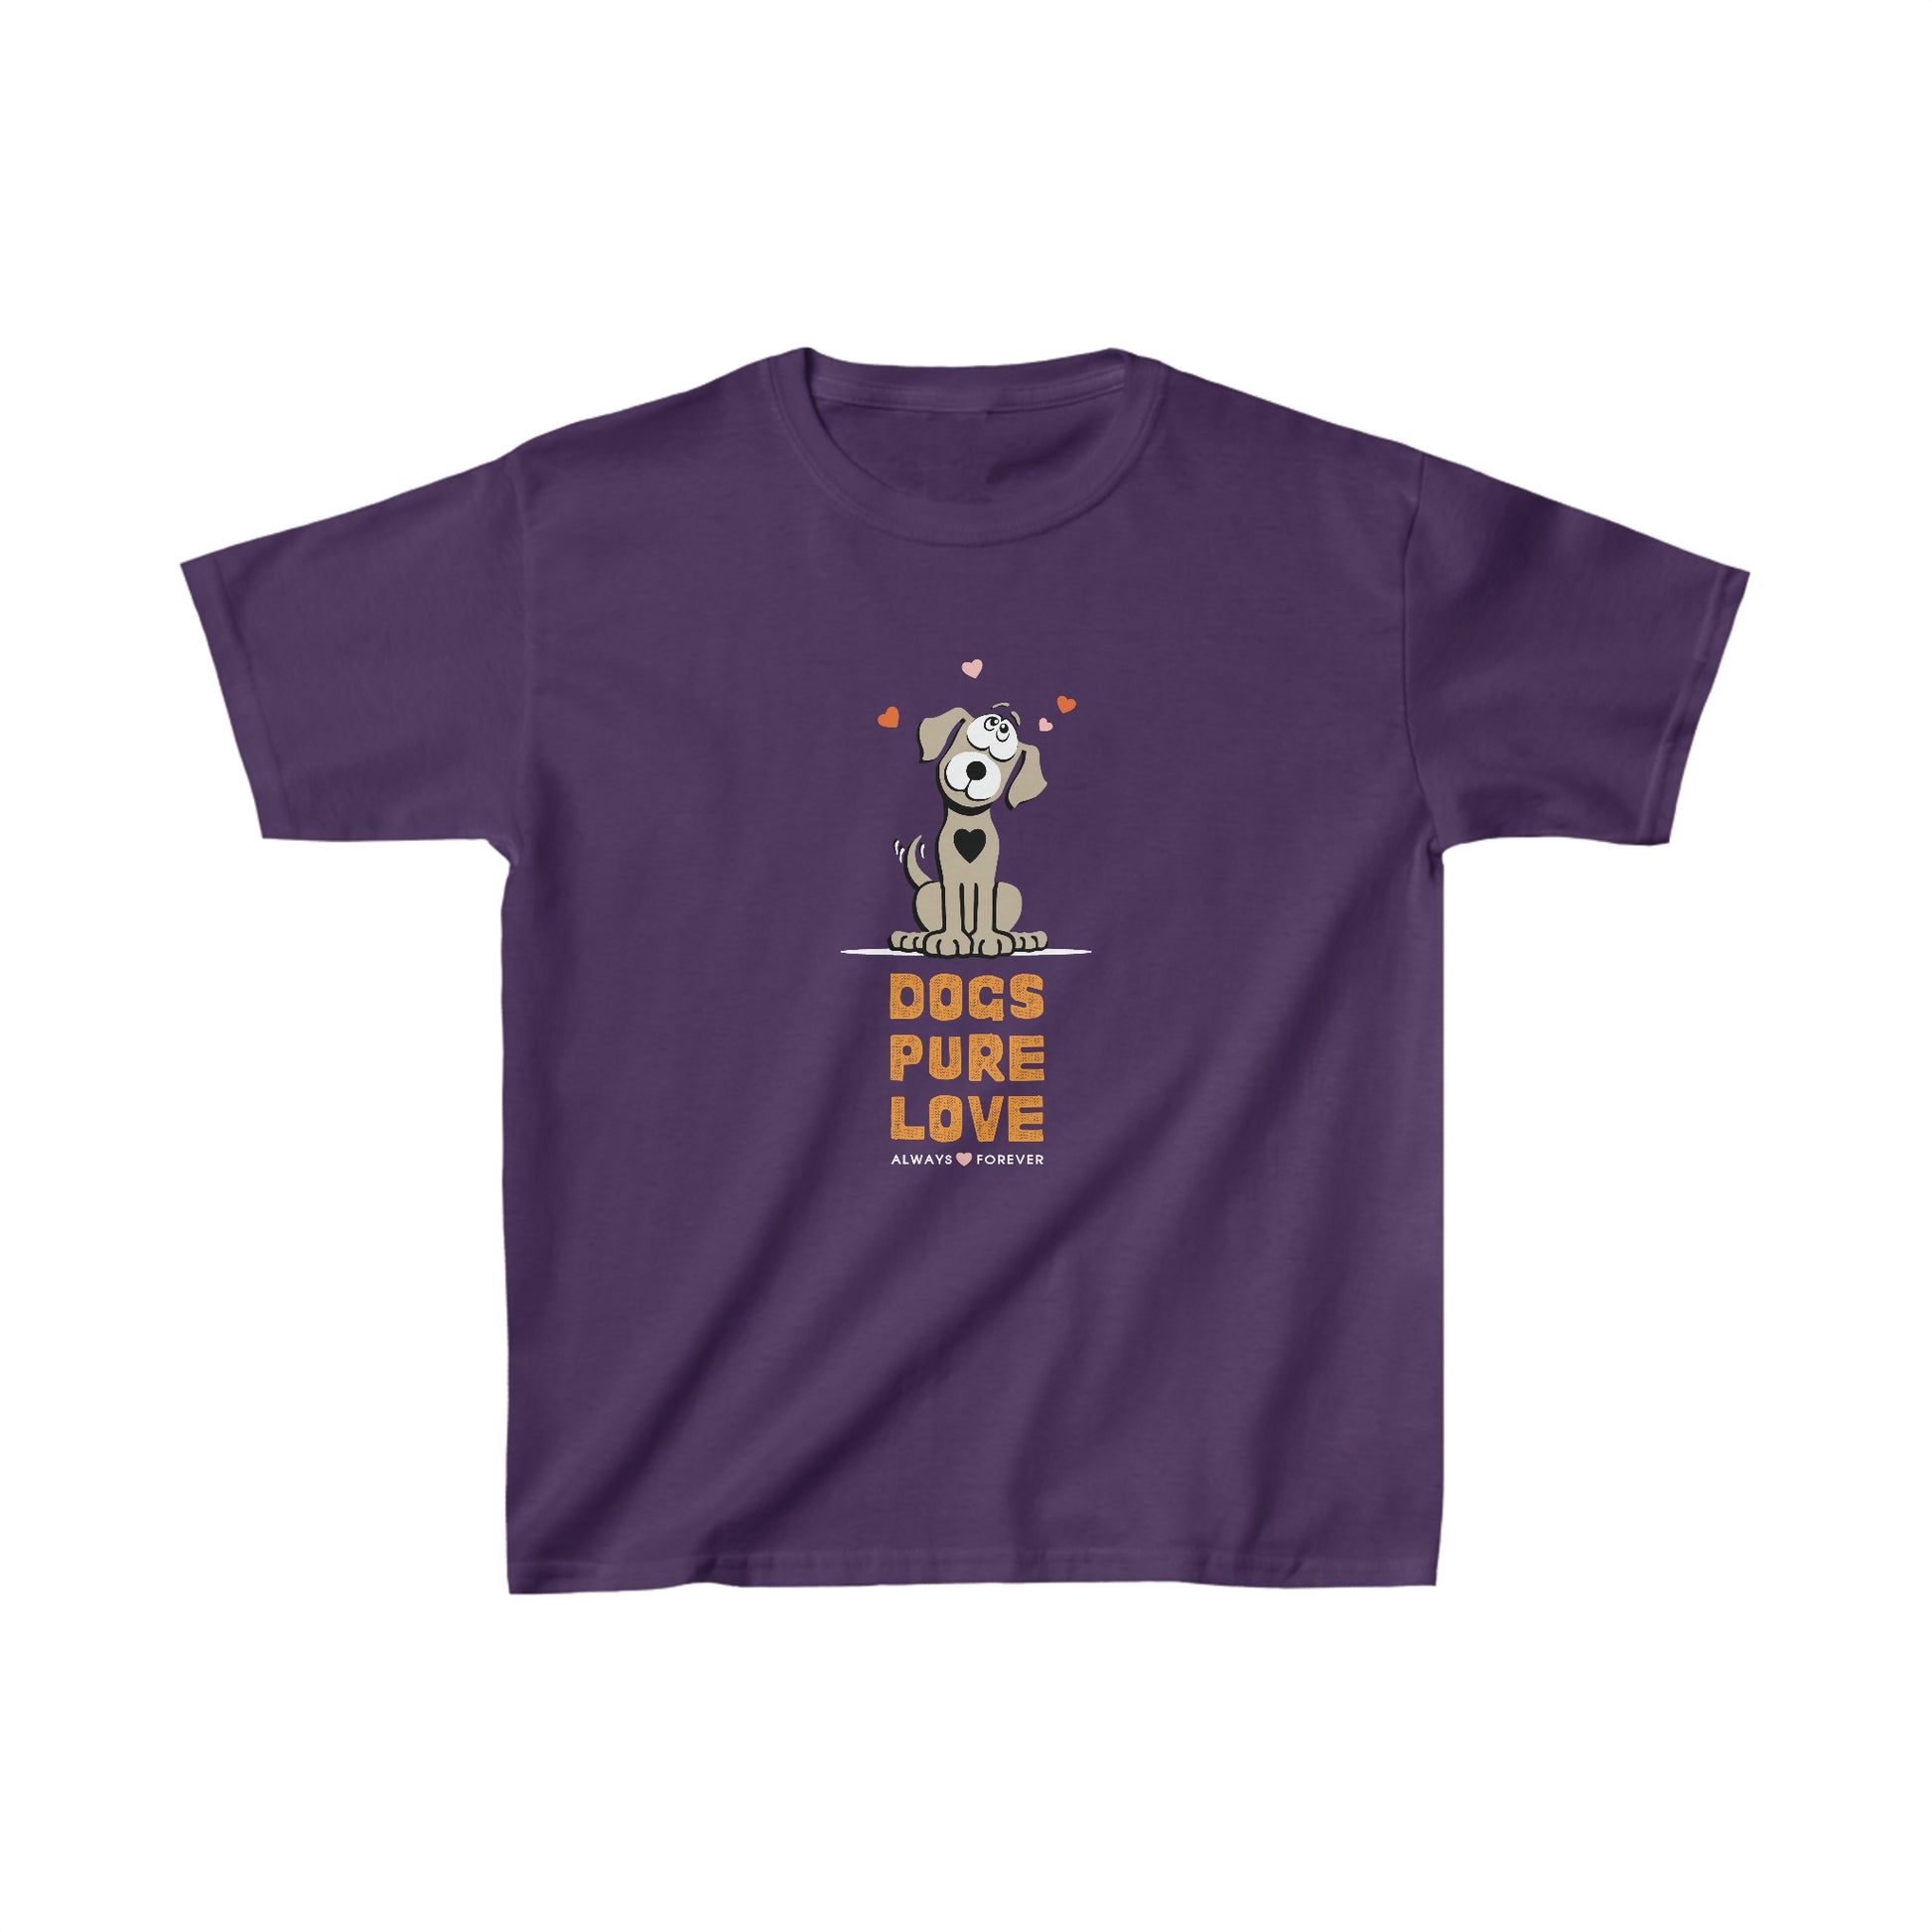 A Dogs Pure Love logo is featured on a purple unisex kids tee, against a white canvas.